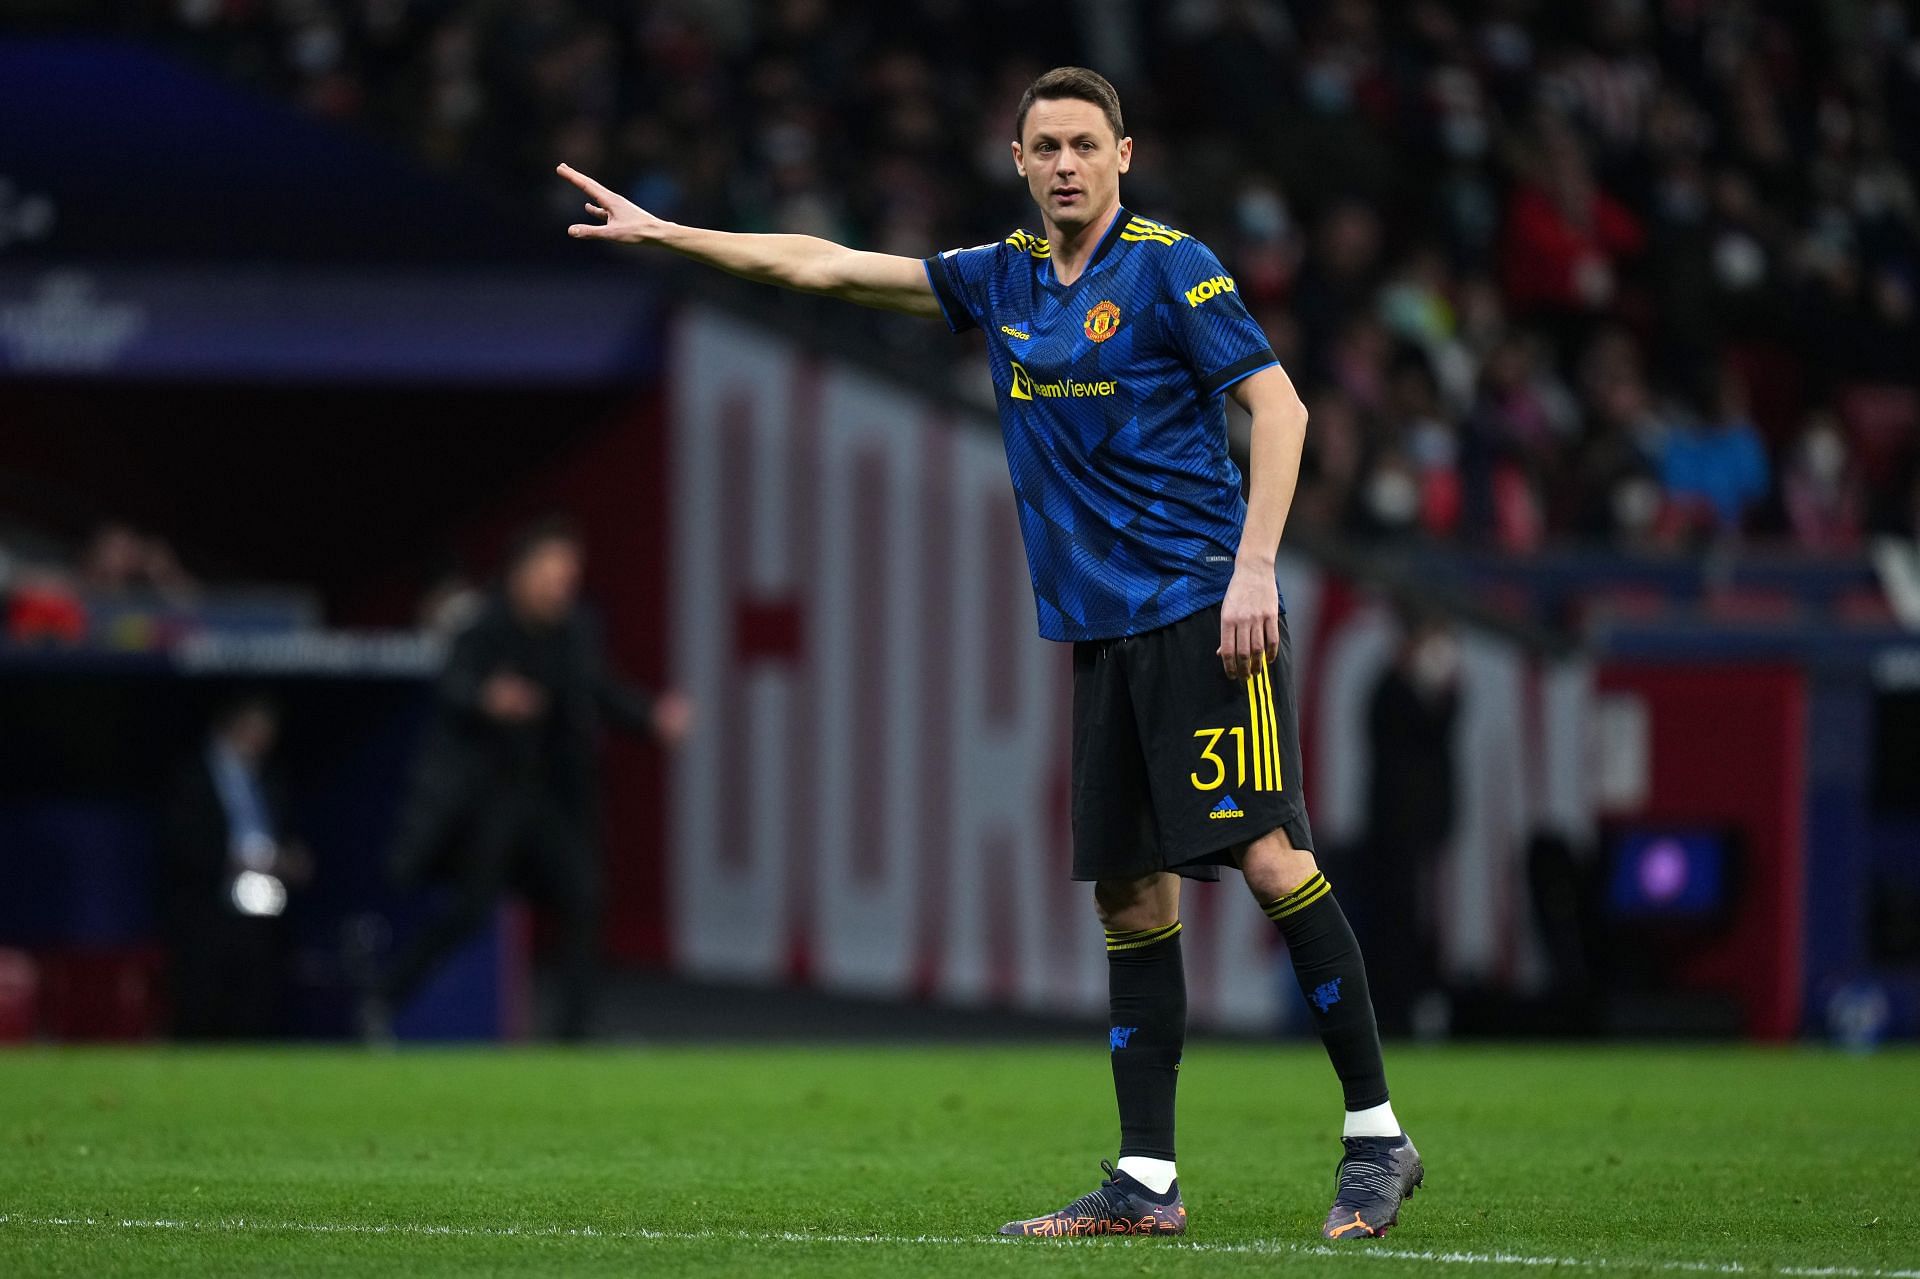 Nemanja Matic is one of the most experienced players in the Manchester United team